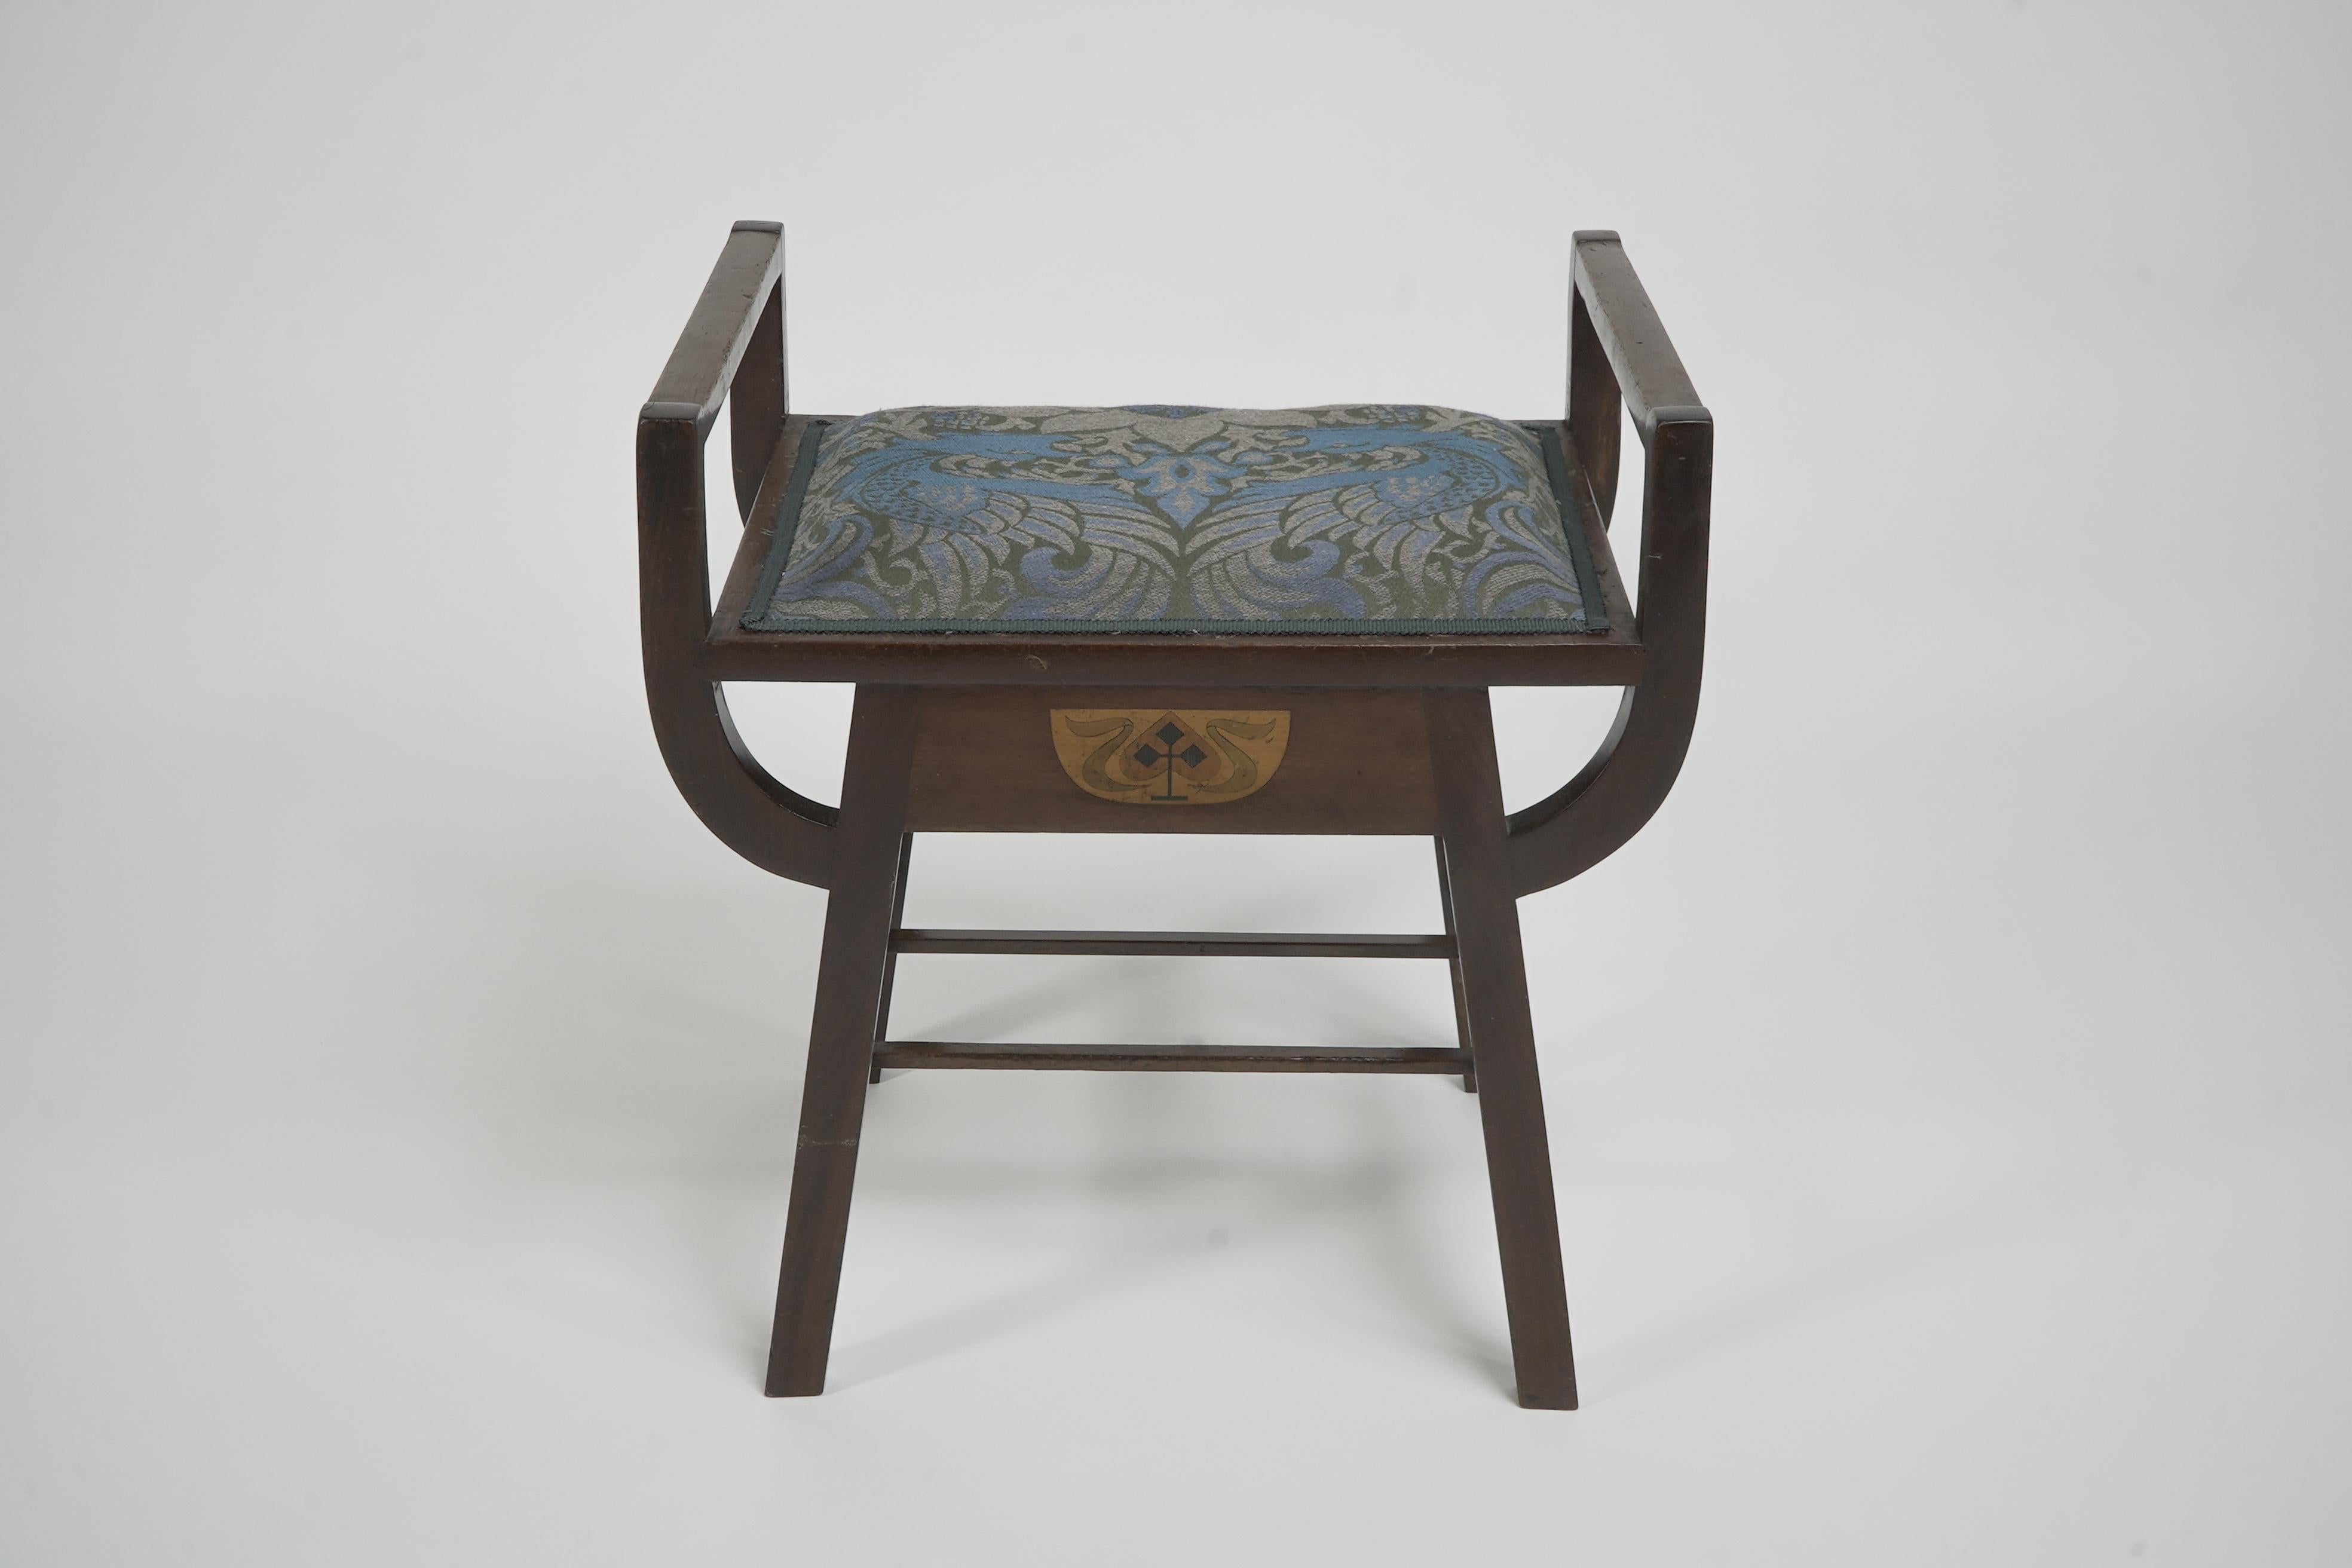 G M Ellwood and made by J S Henry. 
An Arts and Crafts 'A' framed piano or dressing table stool, with raised sides that simultaneously unite with the legs and the seat sides, a nice progressive design detail. Inlaid with a stylised motif to the